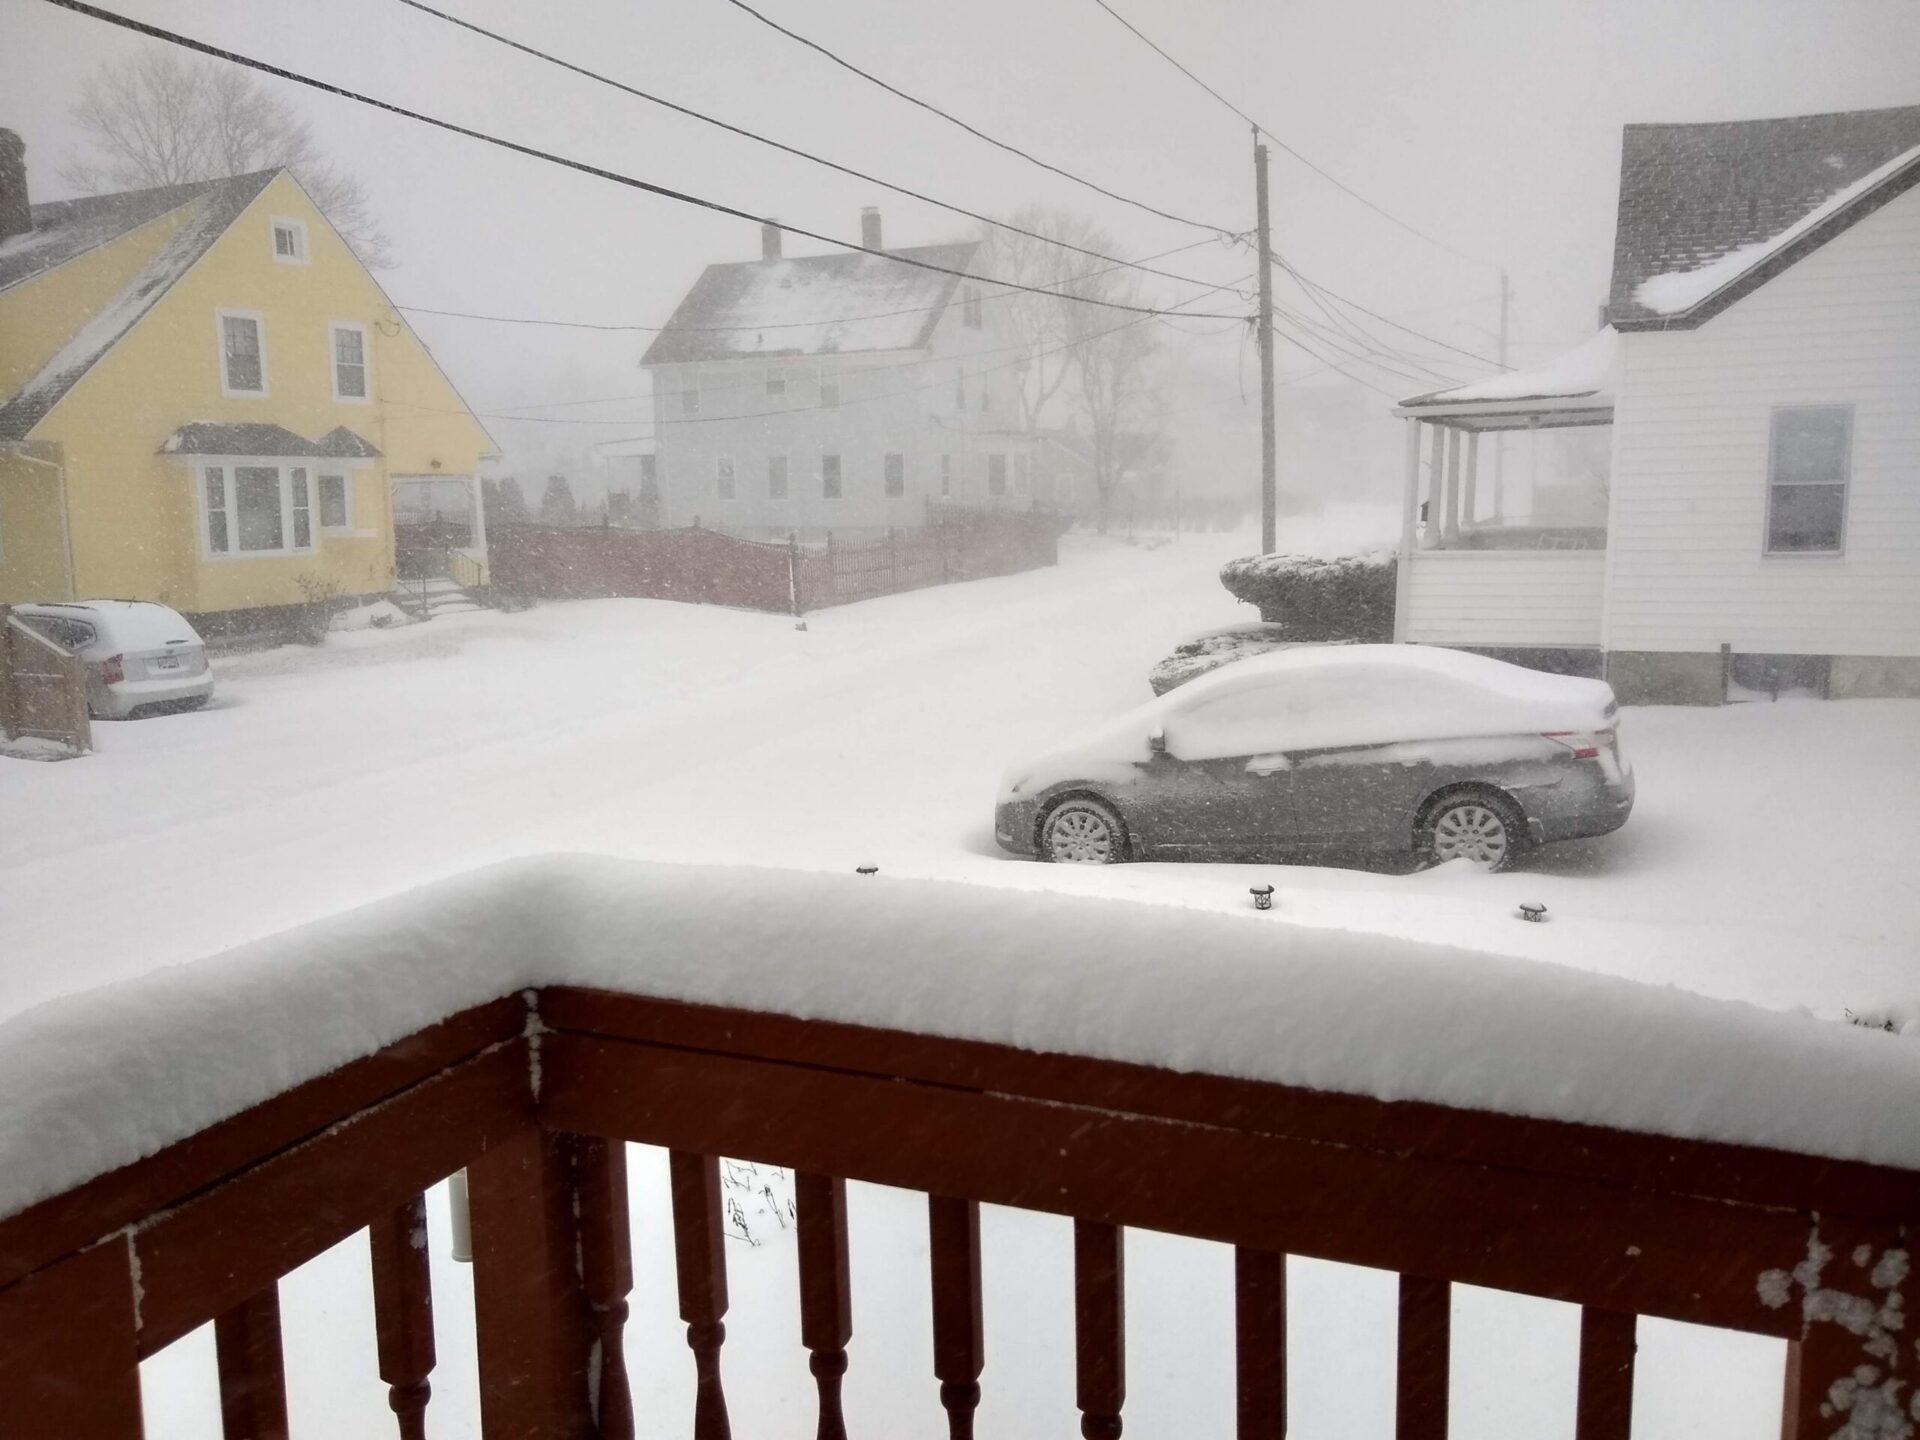 [CREDIT: Lincoln Smith] Snowfall continues in Warwick and throughout RI this afternoon.